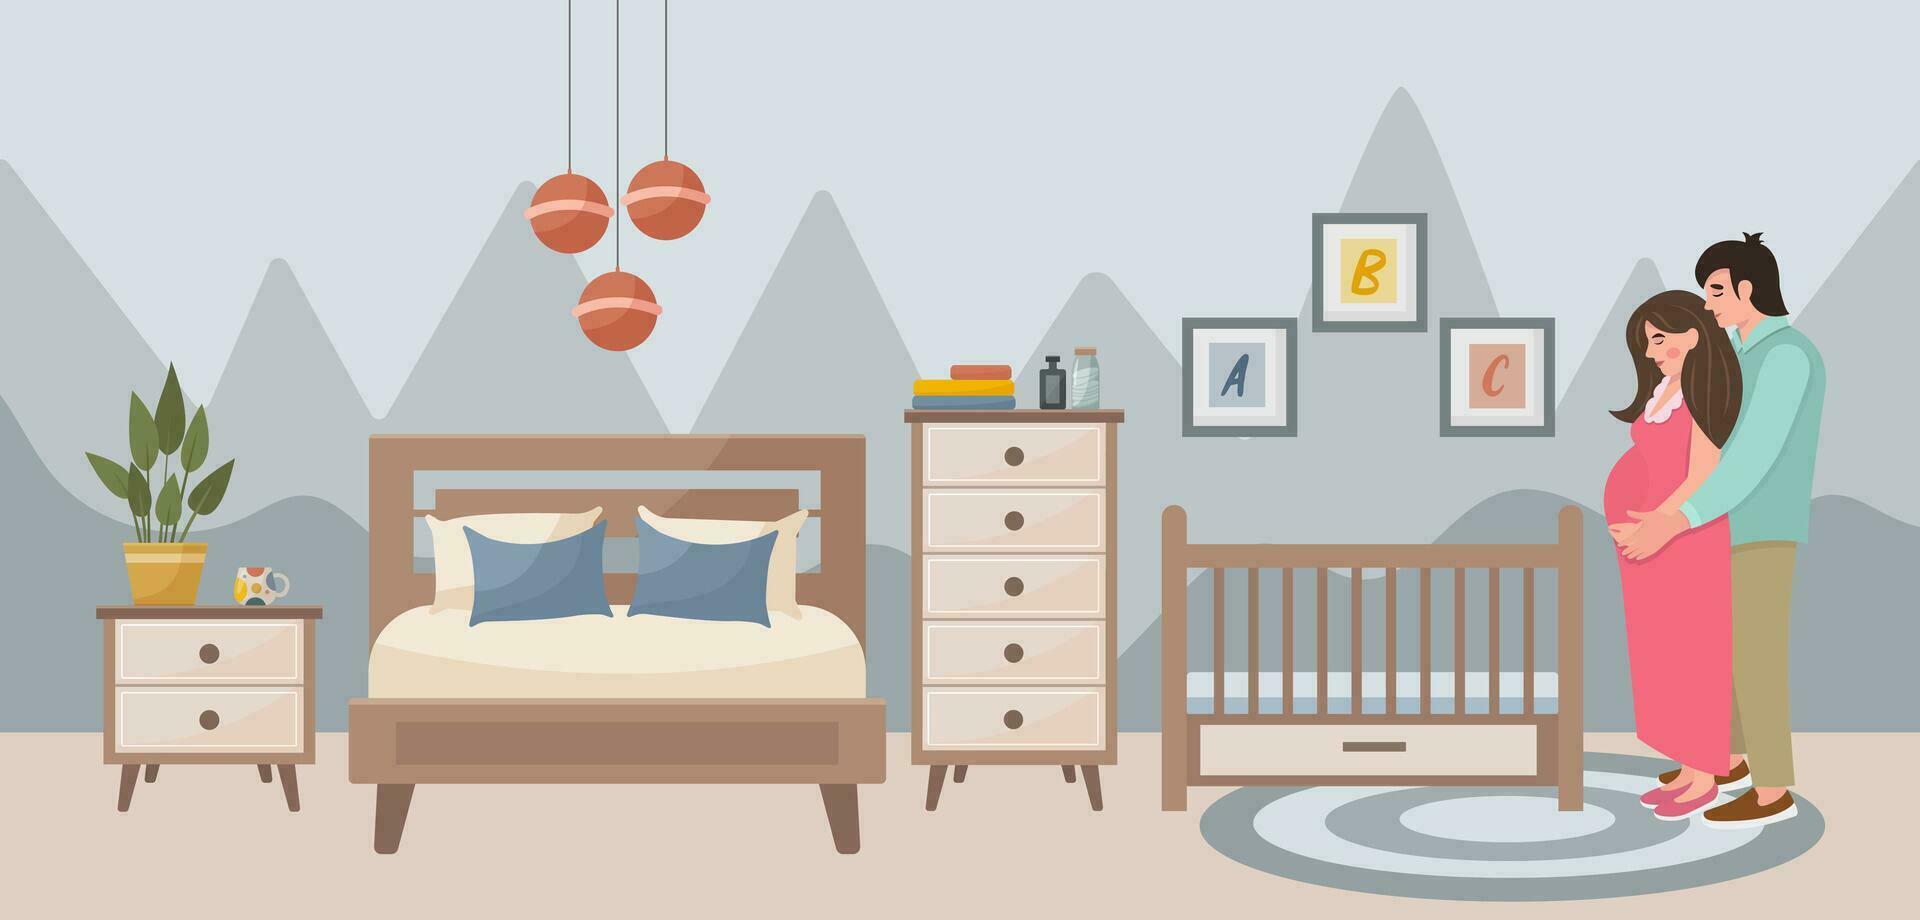 Pregnant woman at the crib. Couple in love. Family concept. Cozy bedroom with a cot. Bedroom interior bed, carpet, lamp, crib, potted plants, paintings, bedside table. vector